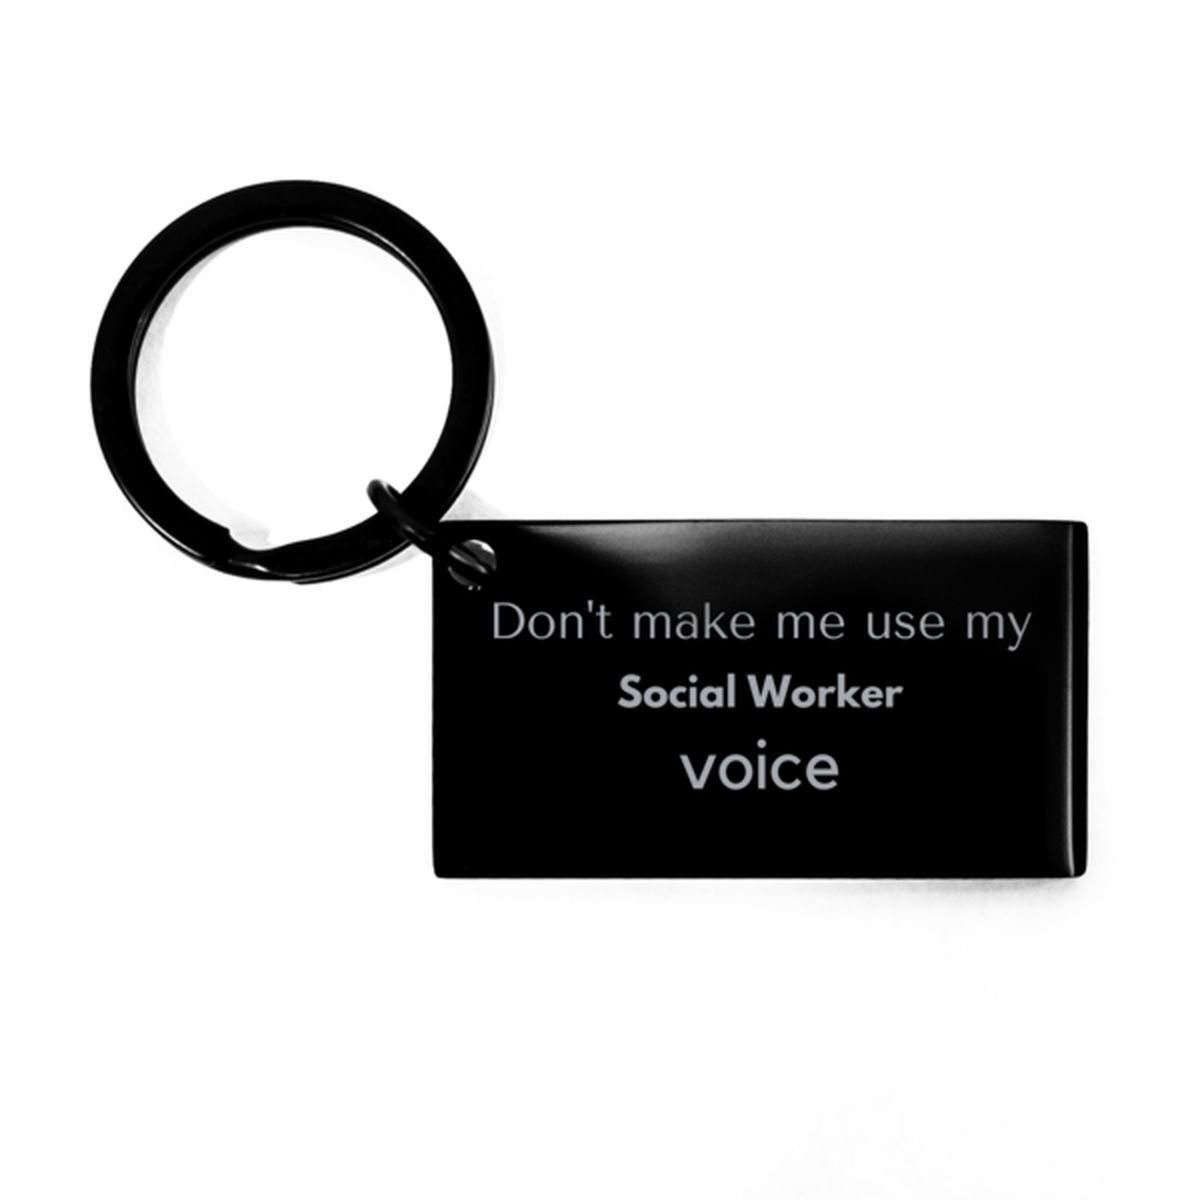 Don't make me use my Social Worker voice, Sarcasm Social Worker Gifts, Christmas Social Worker Keychain Birthday Unique Gifts For Social Worker Coworkers, Men, Women, Colleague, Friends